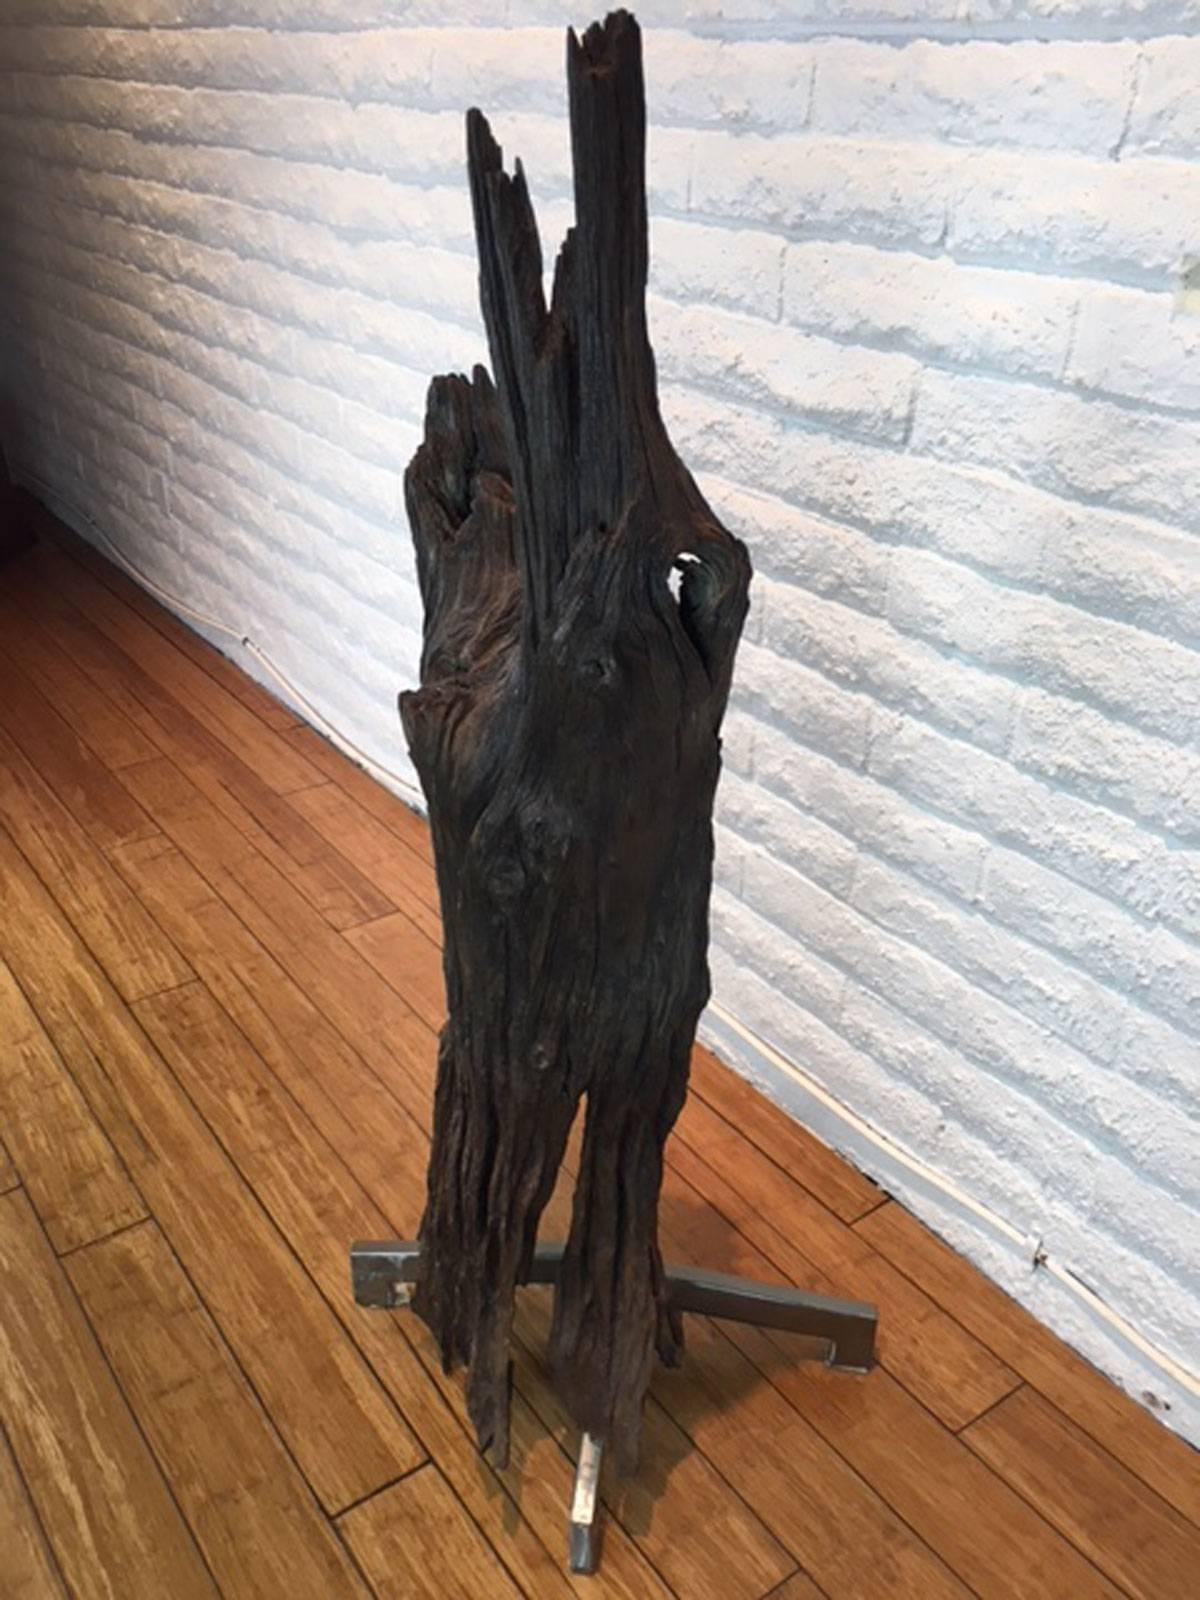 Natural ironwood mounted and made by master wood artist and designer Scott Mills who only uses reclaimed (deadfall or storm downed trees) in the pieces he designs and produces. This piece is big, solid, eye-catching, and heavy. Appropriate for home